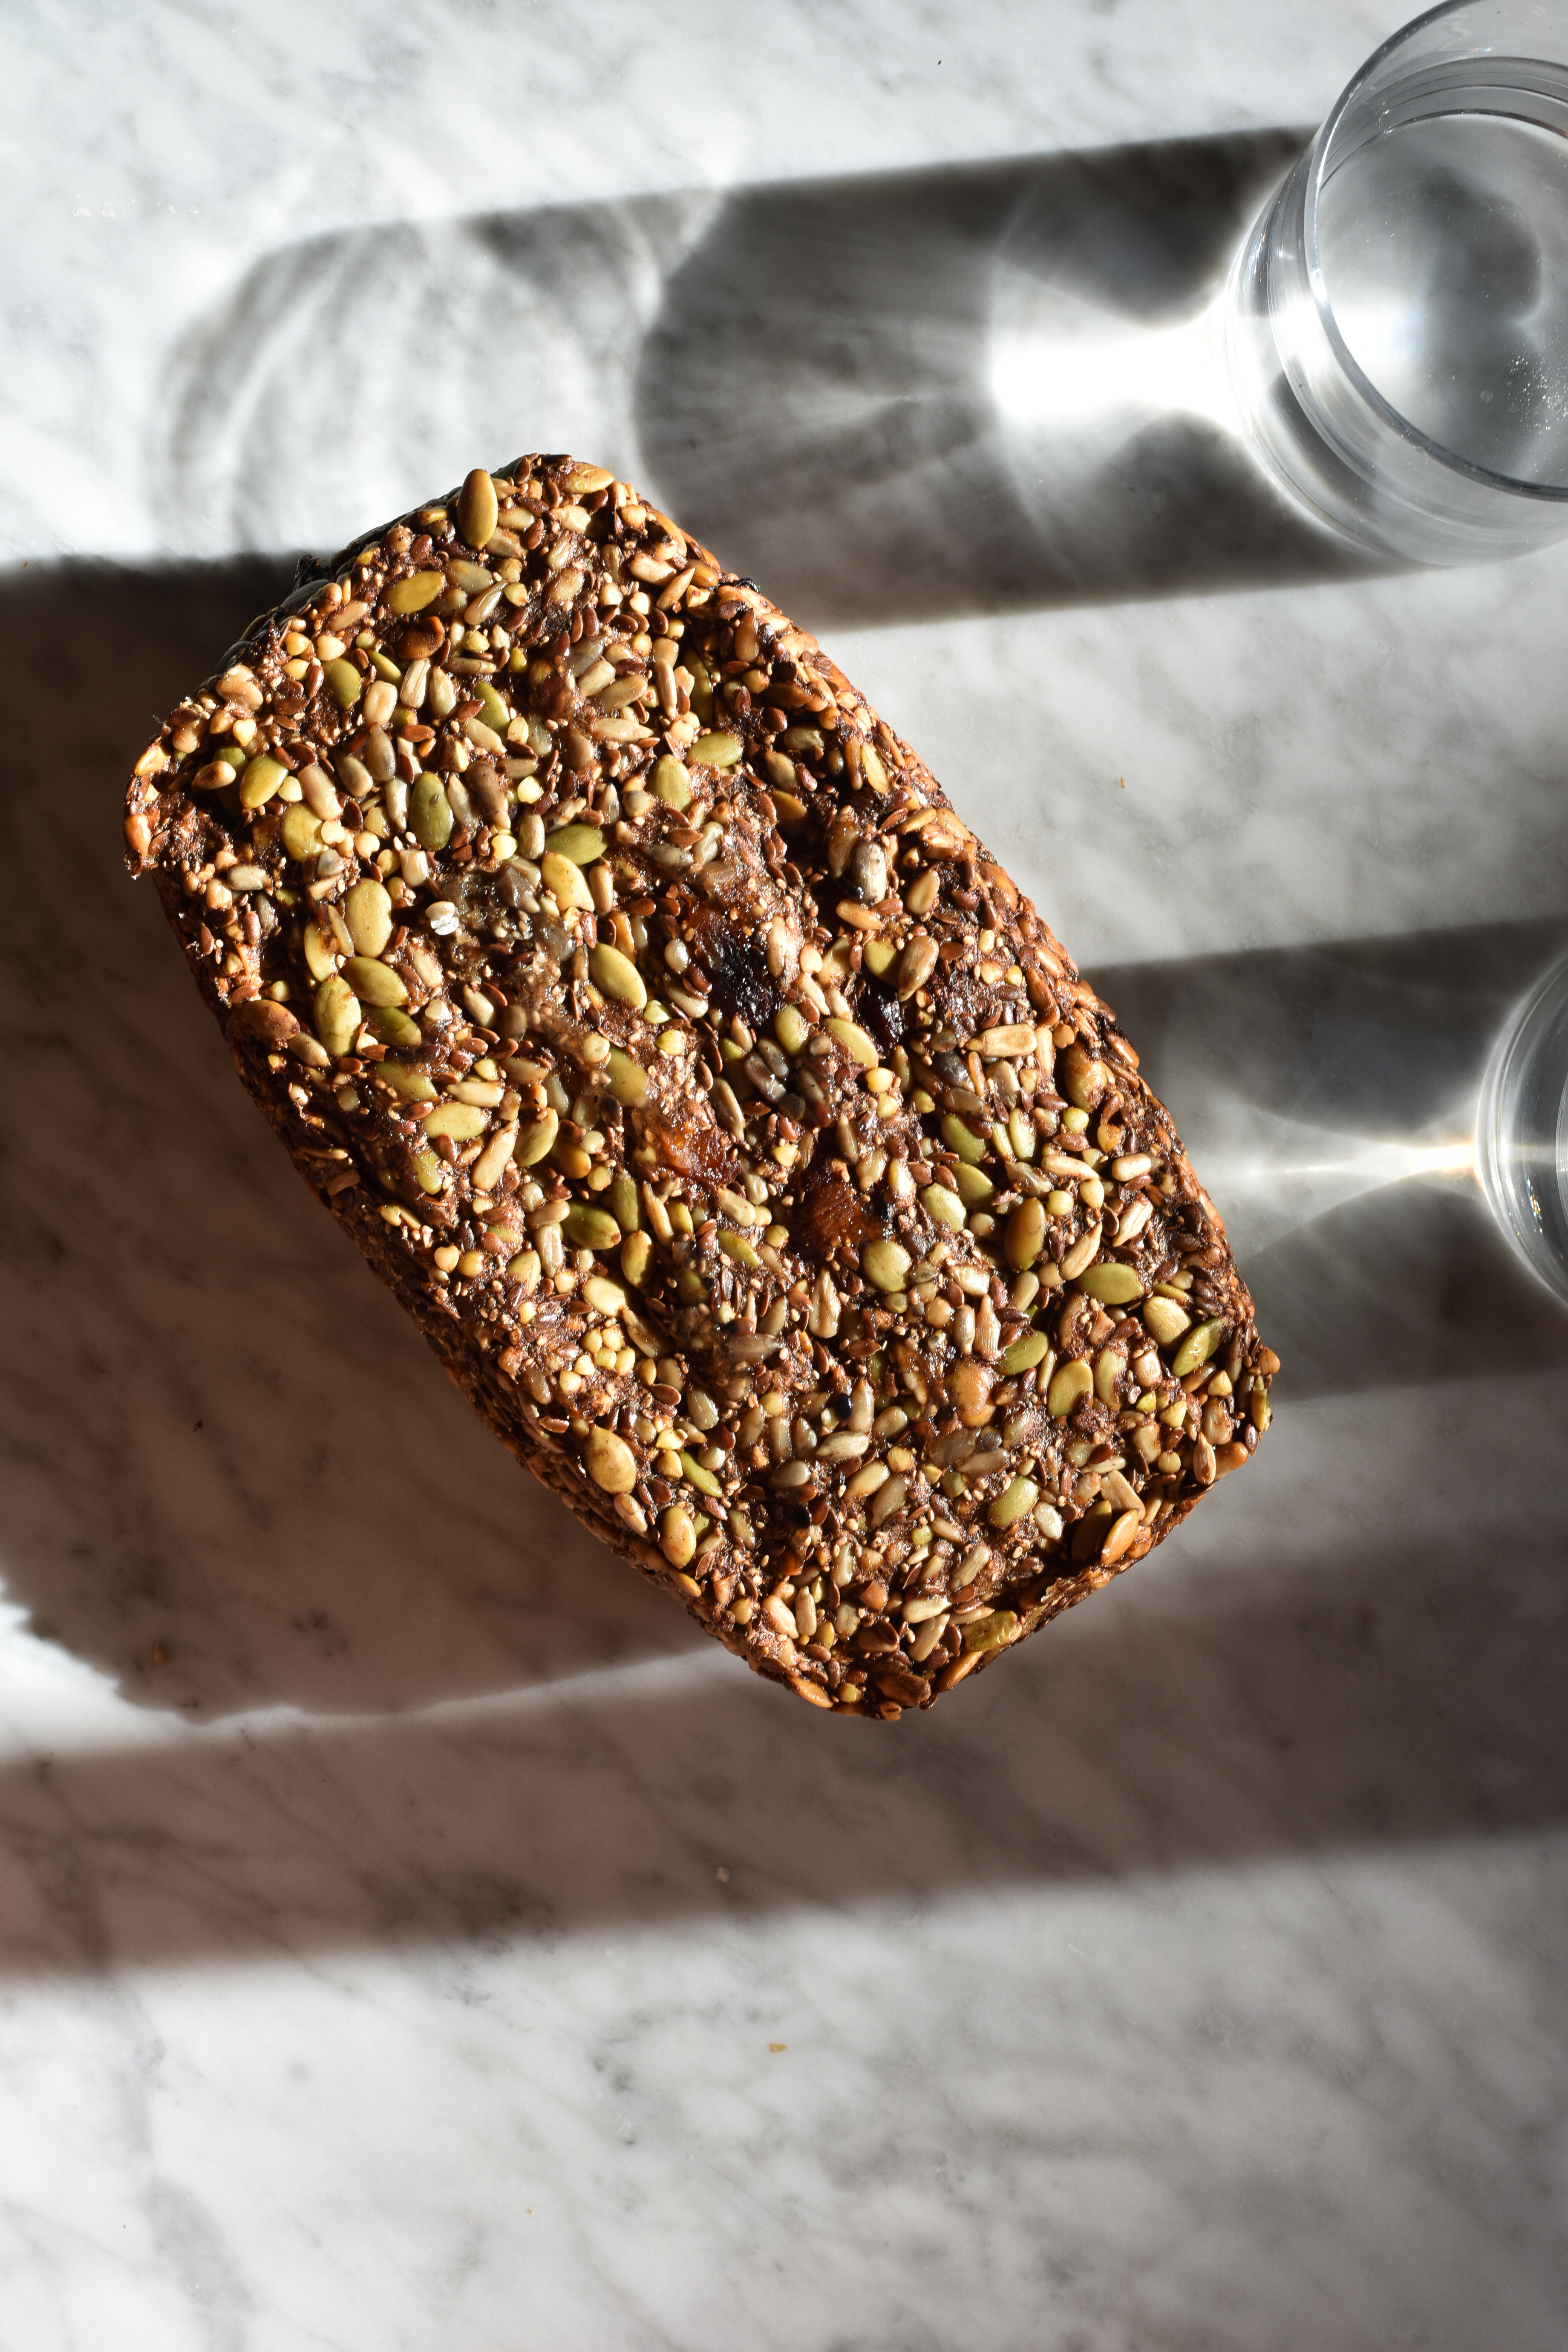 Nut-free gluten-free Fruit Loaf on a marble backdrop with sunlit water glasses